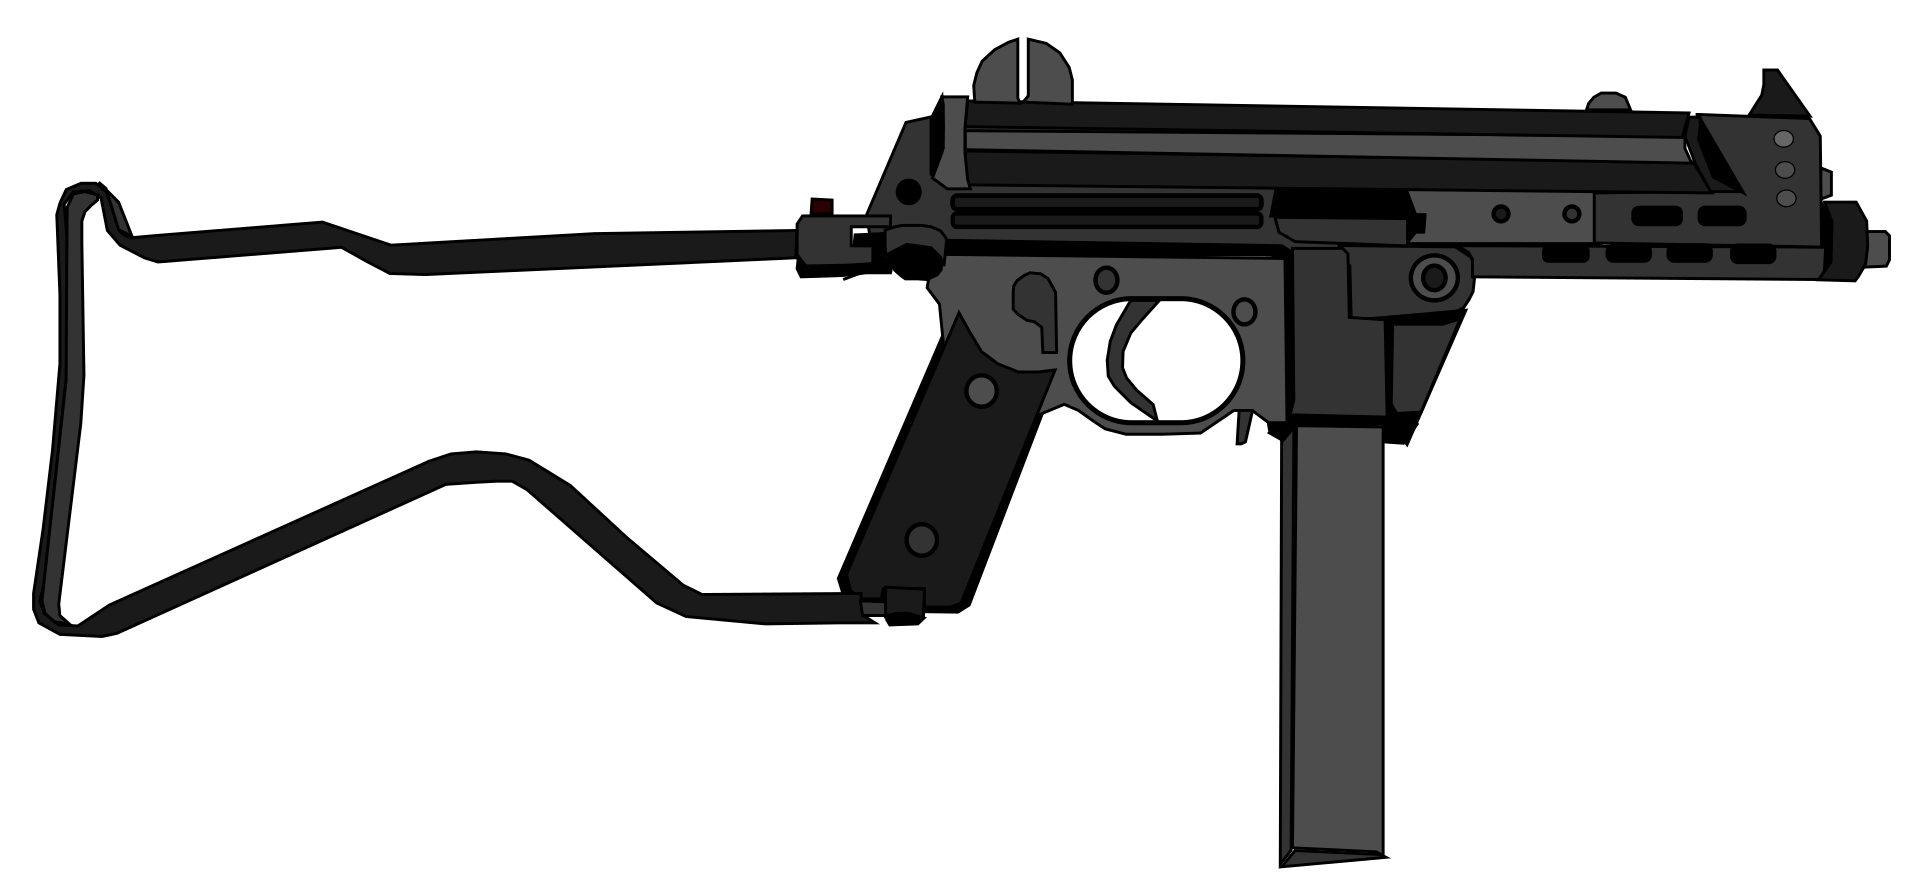 Walther MPK.svg.png